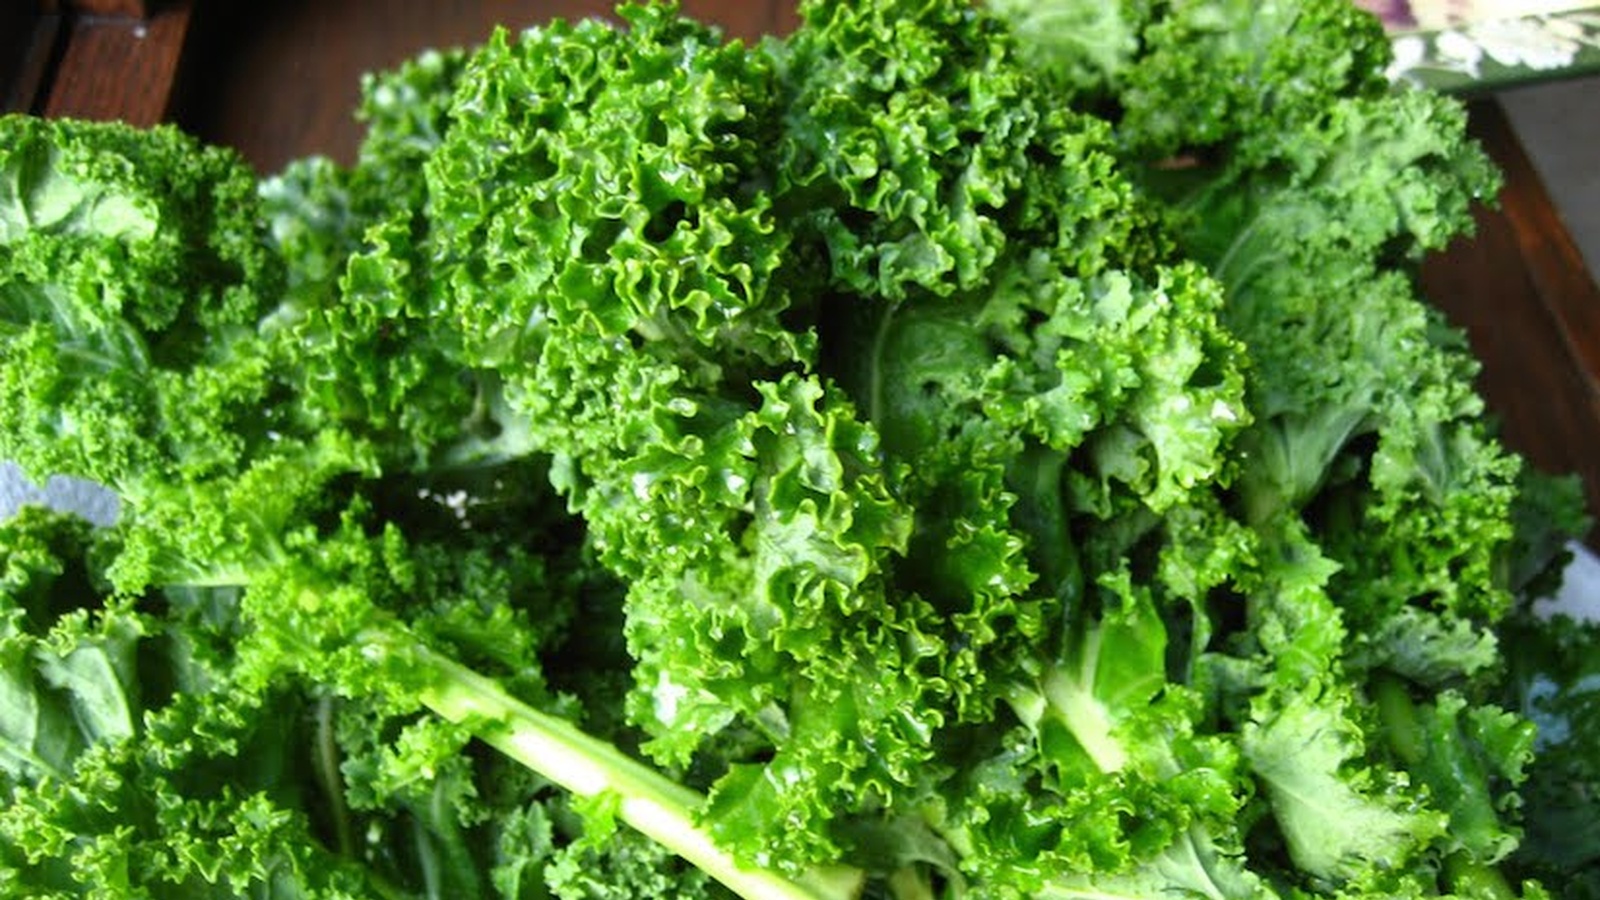 17 Fun Facts About Kale